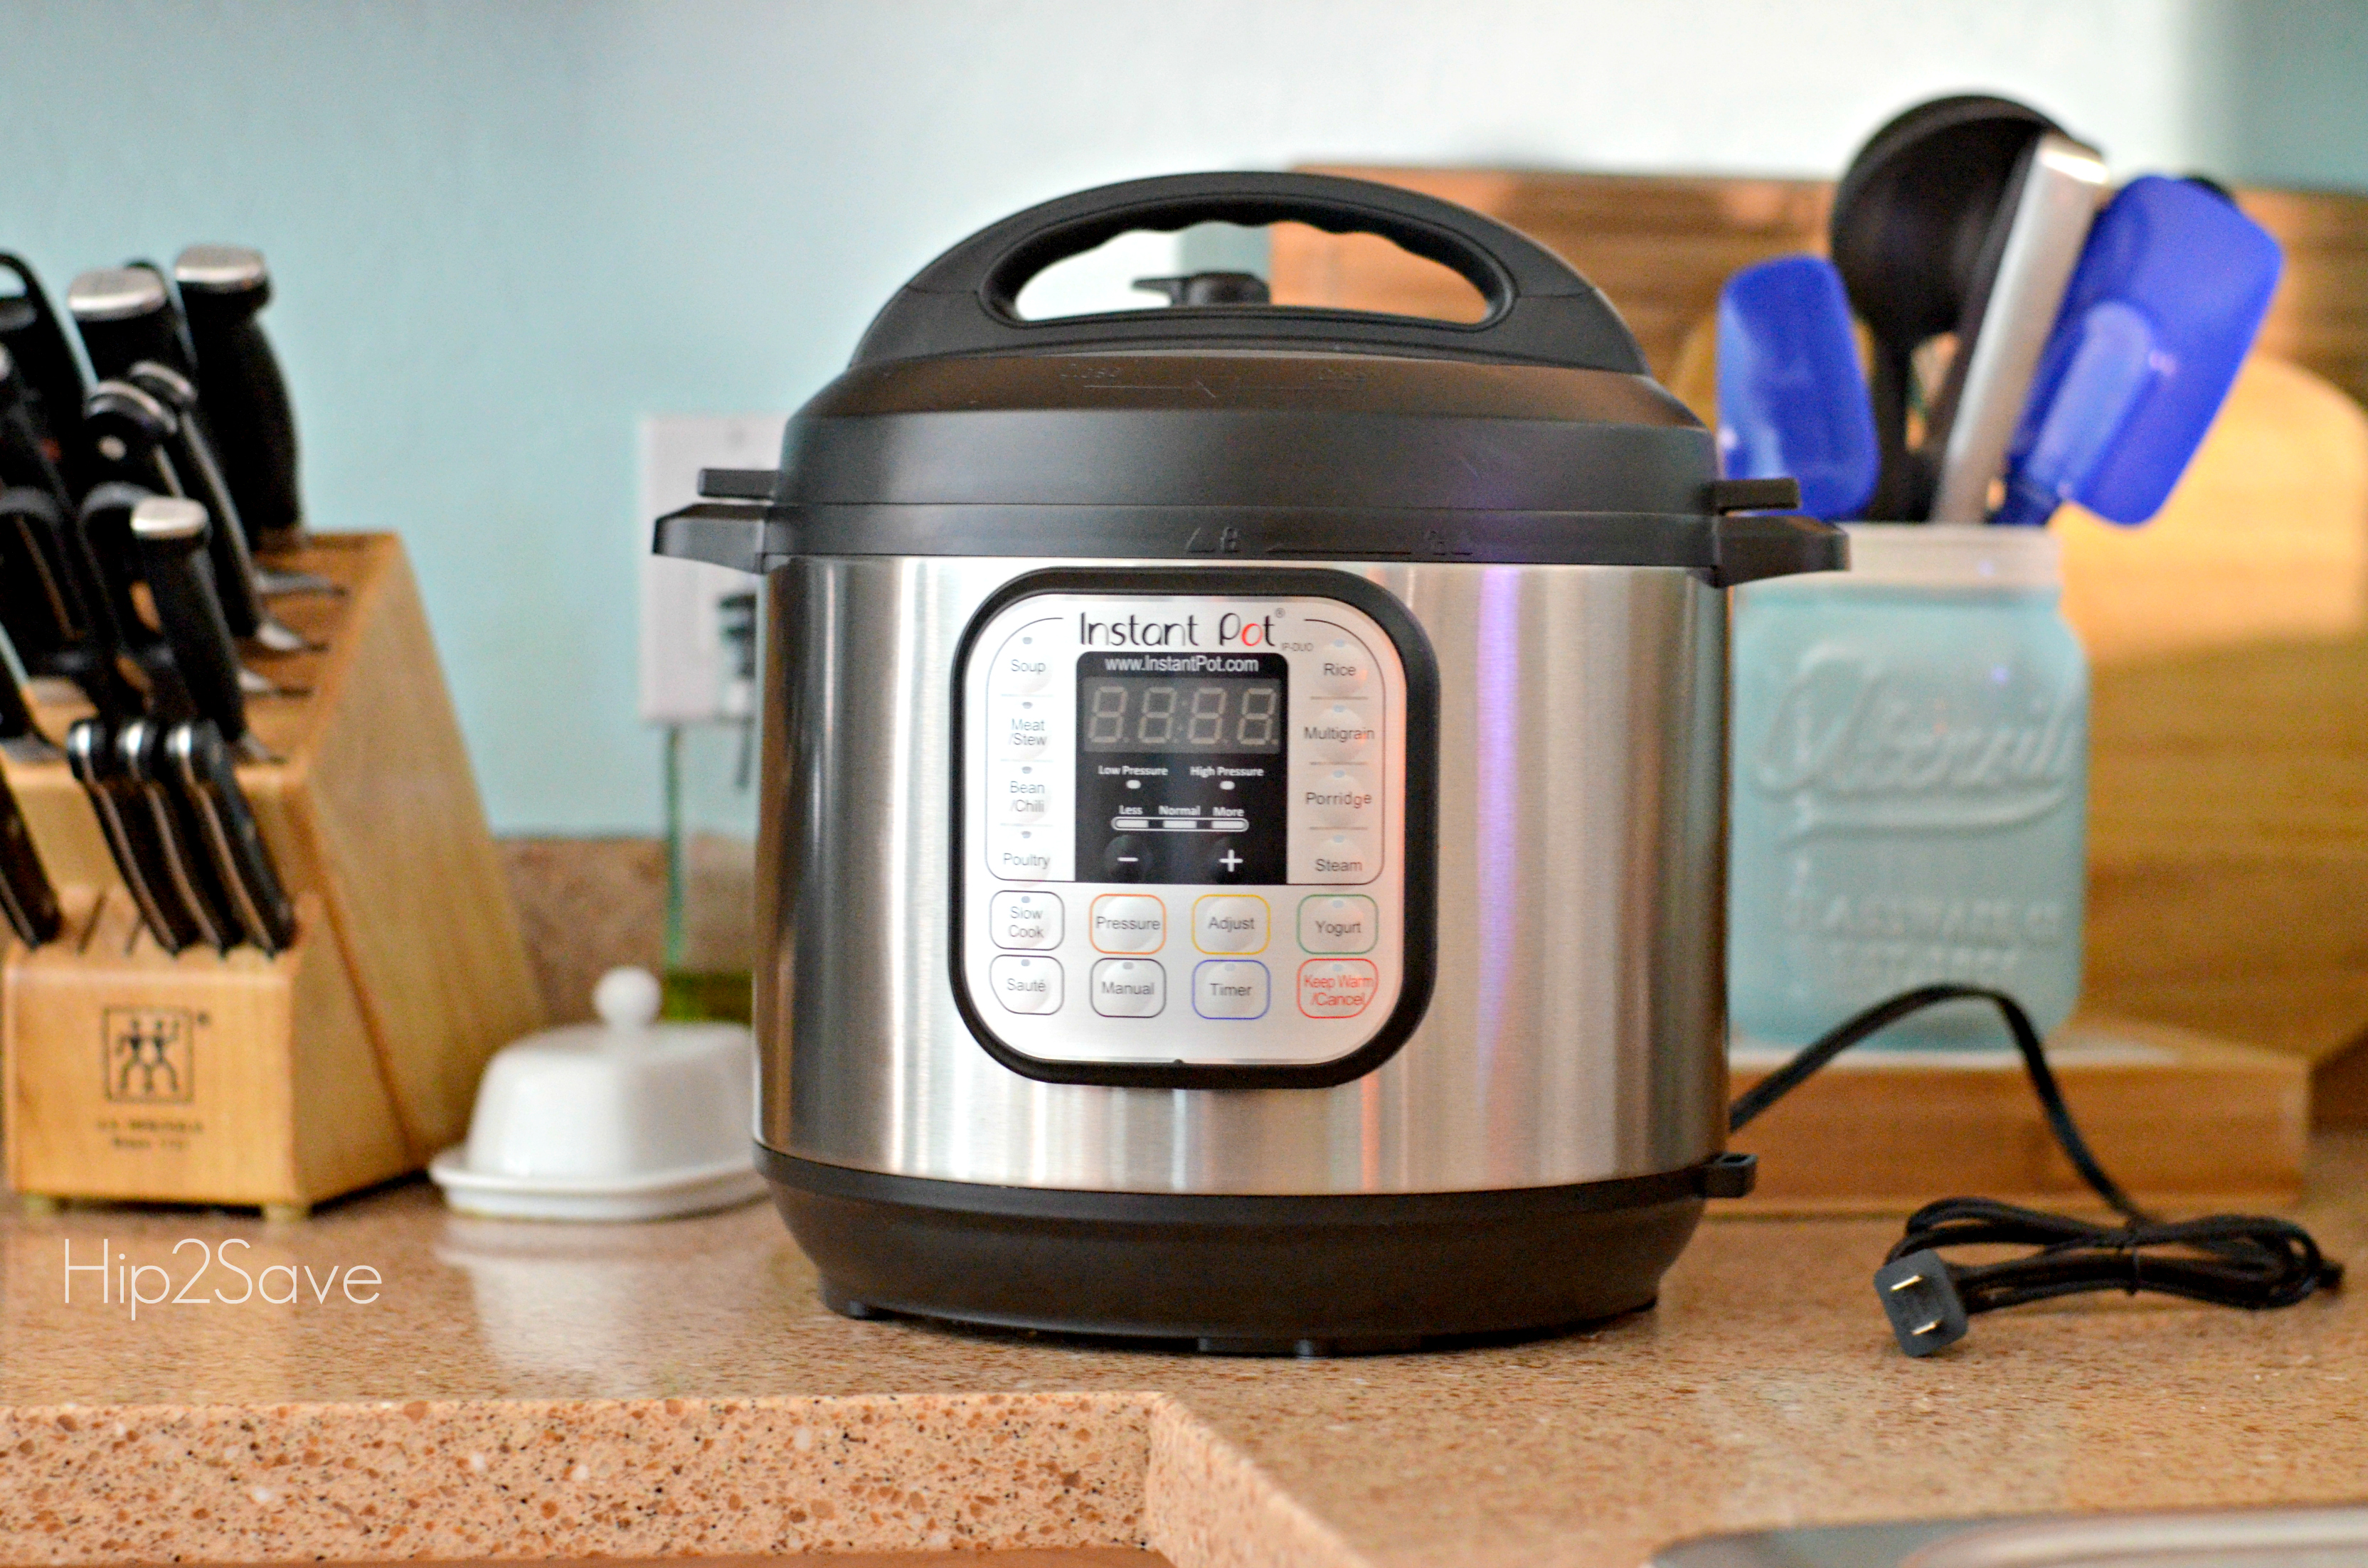 Highly Rated Amazon Pressure Cooker